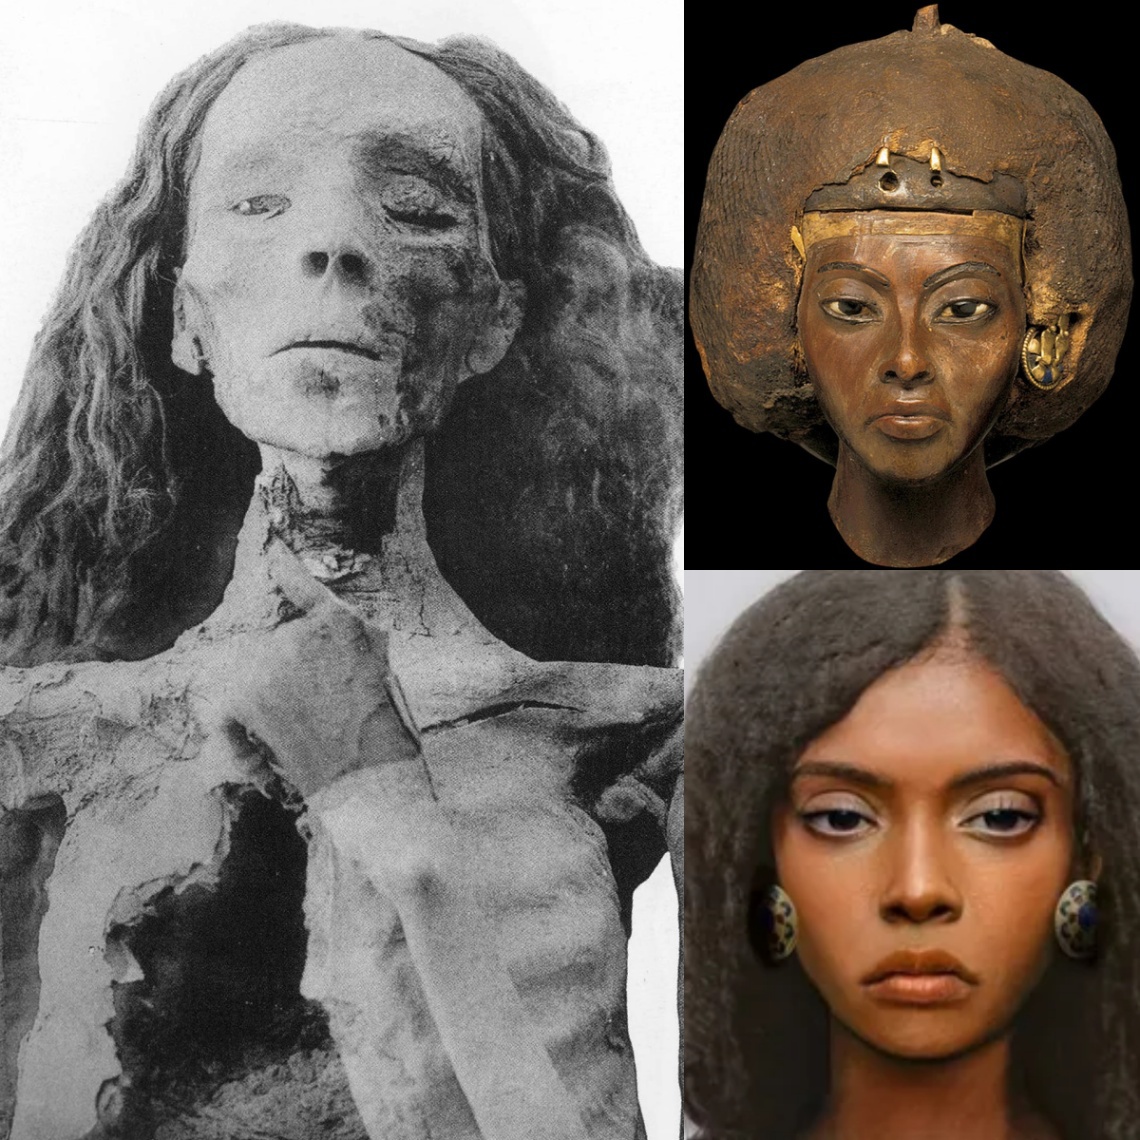 FACTS: Tiye (also known as Tiy, 1398-1338 BCE) was a queen of Egypt of the 18th dynasty.